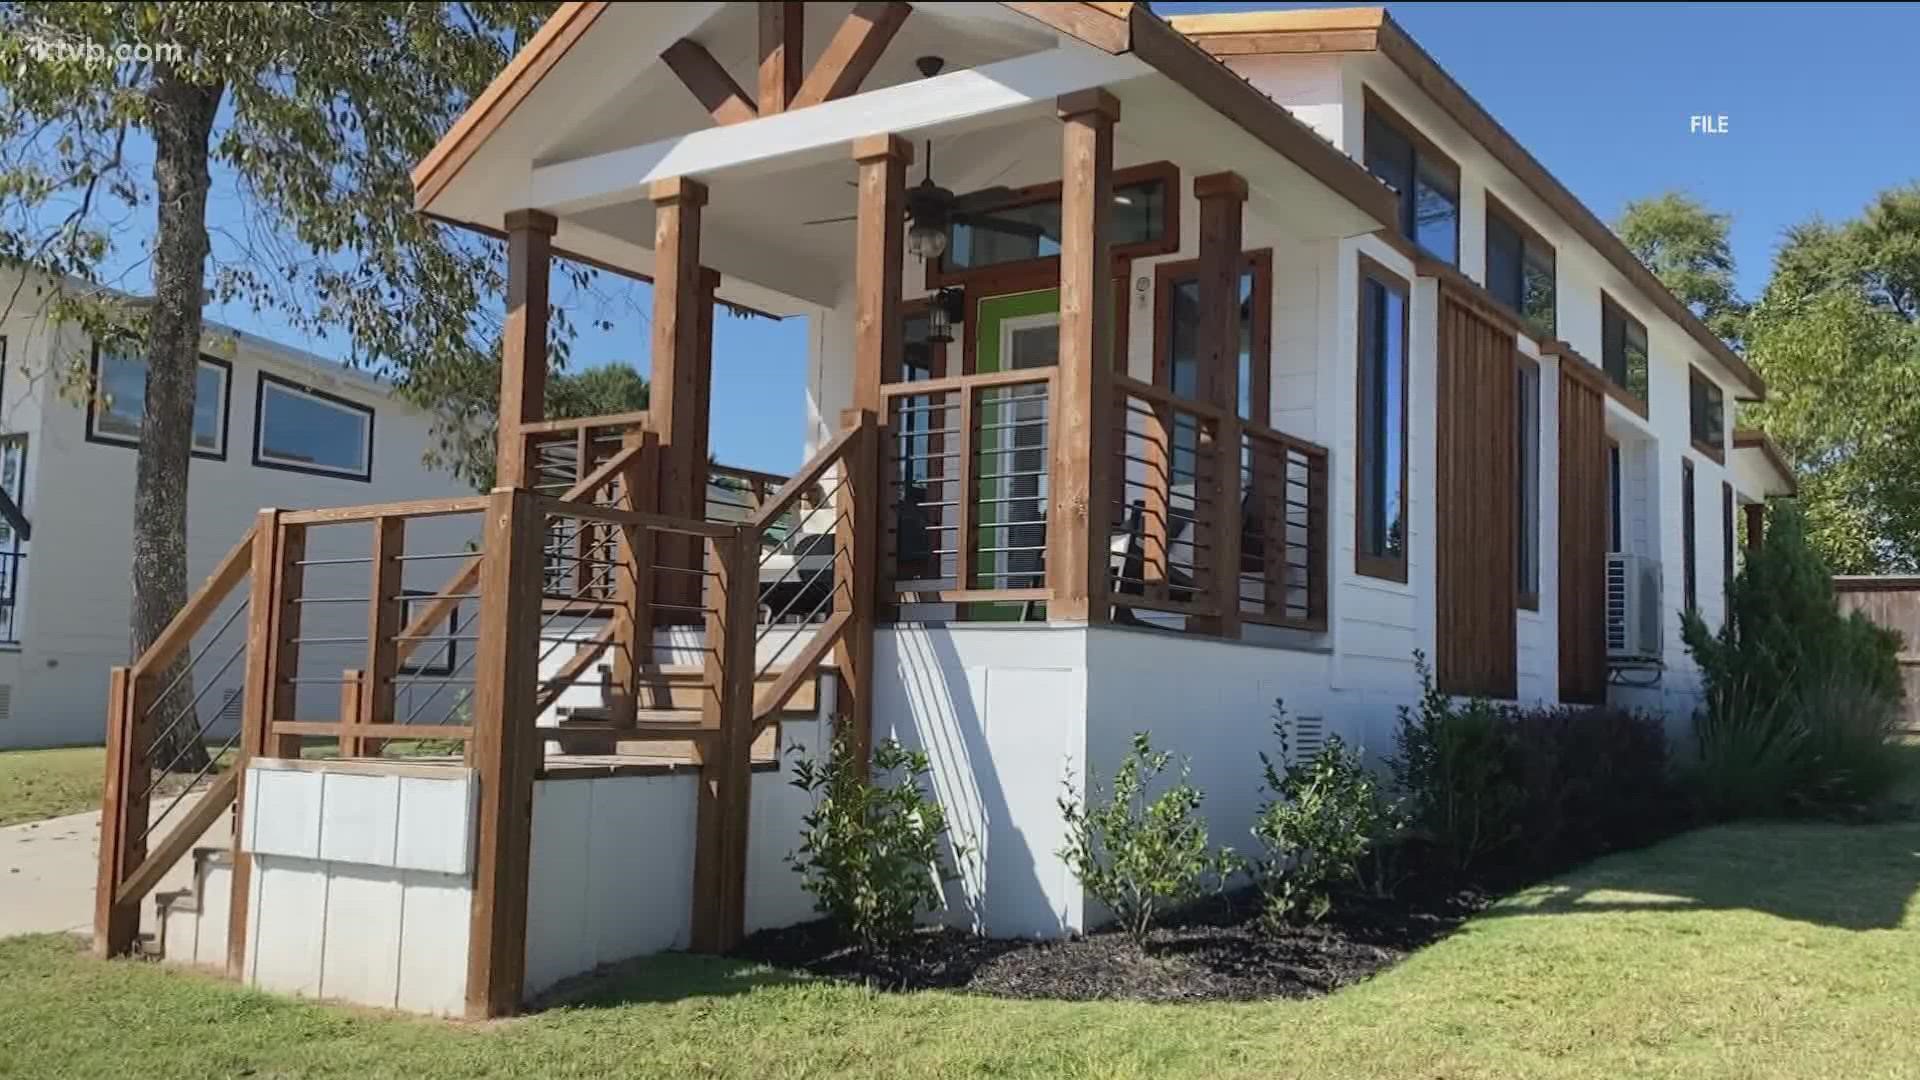 The city of Boise is engaging with the public to create new affordable housing units in the city, including constructing tiny homes and ADU’s.